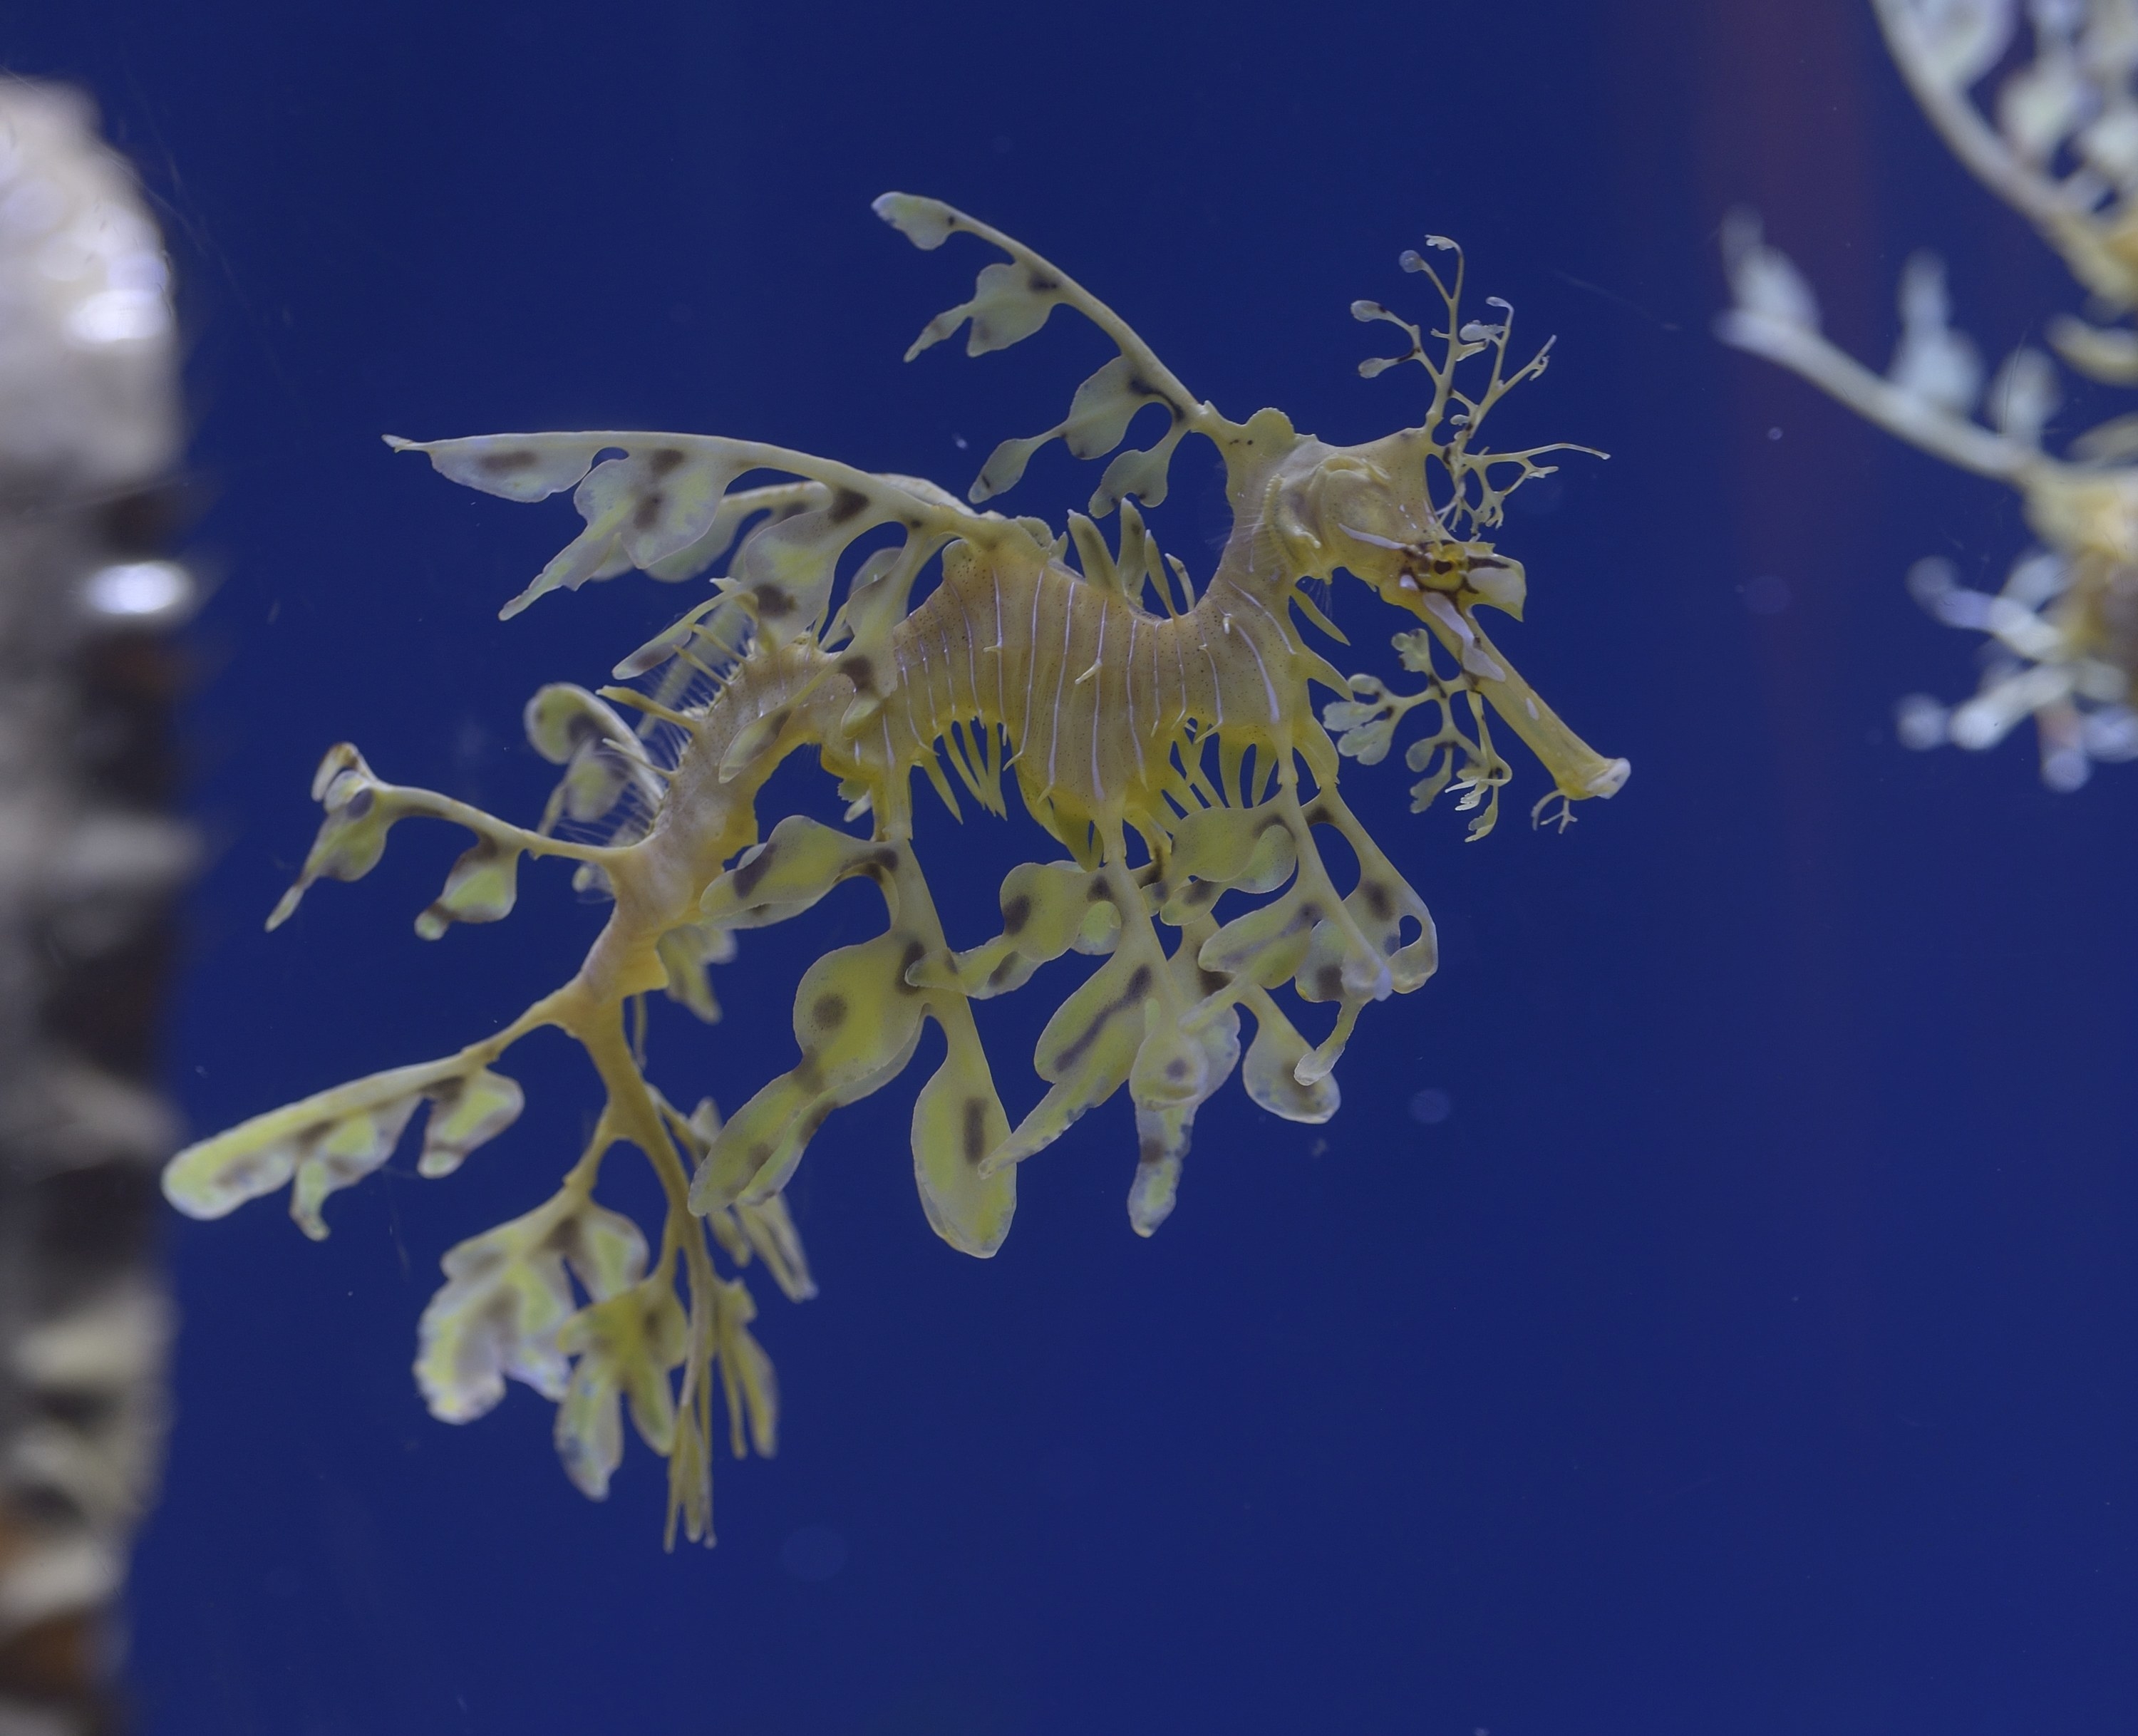 A Leafy Sea Dragon at the Aquarium of the Pacific in Long Beach, Calif., on August 13, 2013.